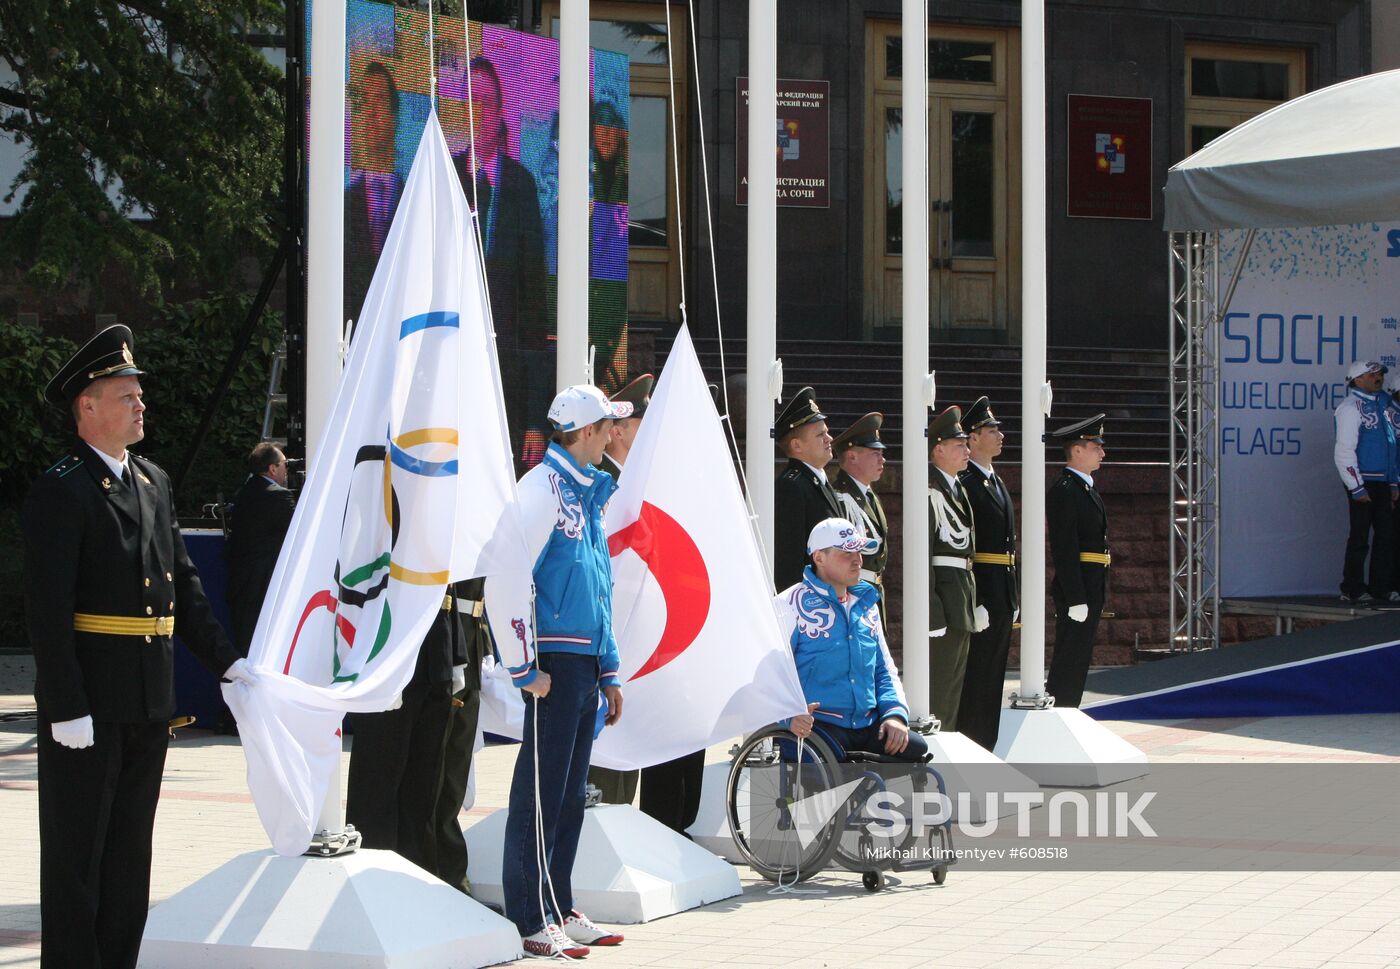 Meeting Olympic and Paralympic flags in Sochi